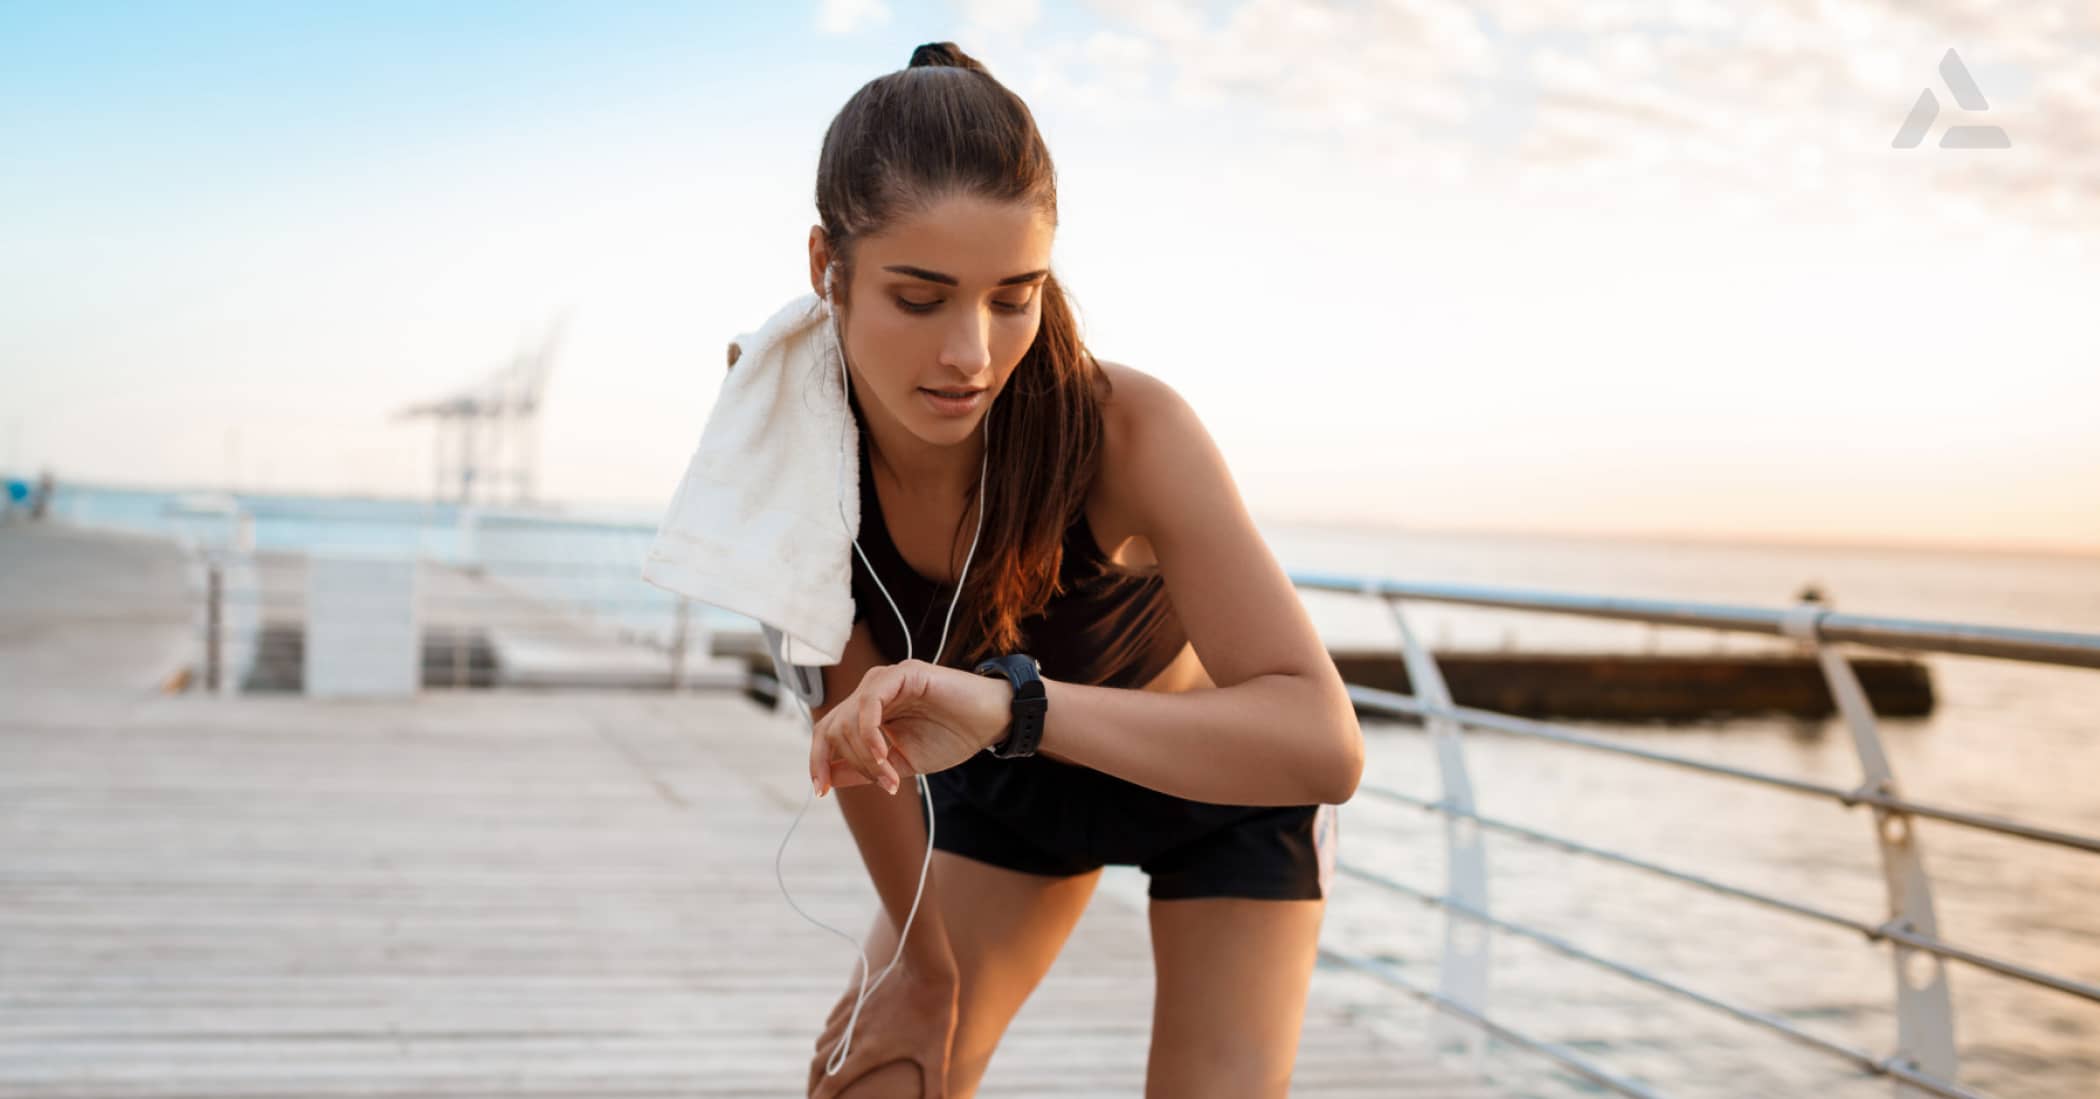 A woman in workout attire with a towel around her neck looks at her smartwatch on a boardwalk by the sea during sunrise or sunset, embodying the future of connected fitness as highlighted in the 2024 Guide.